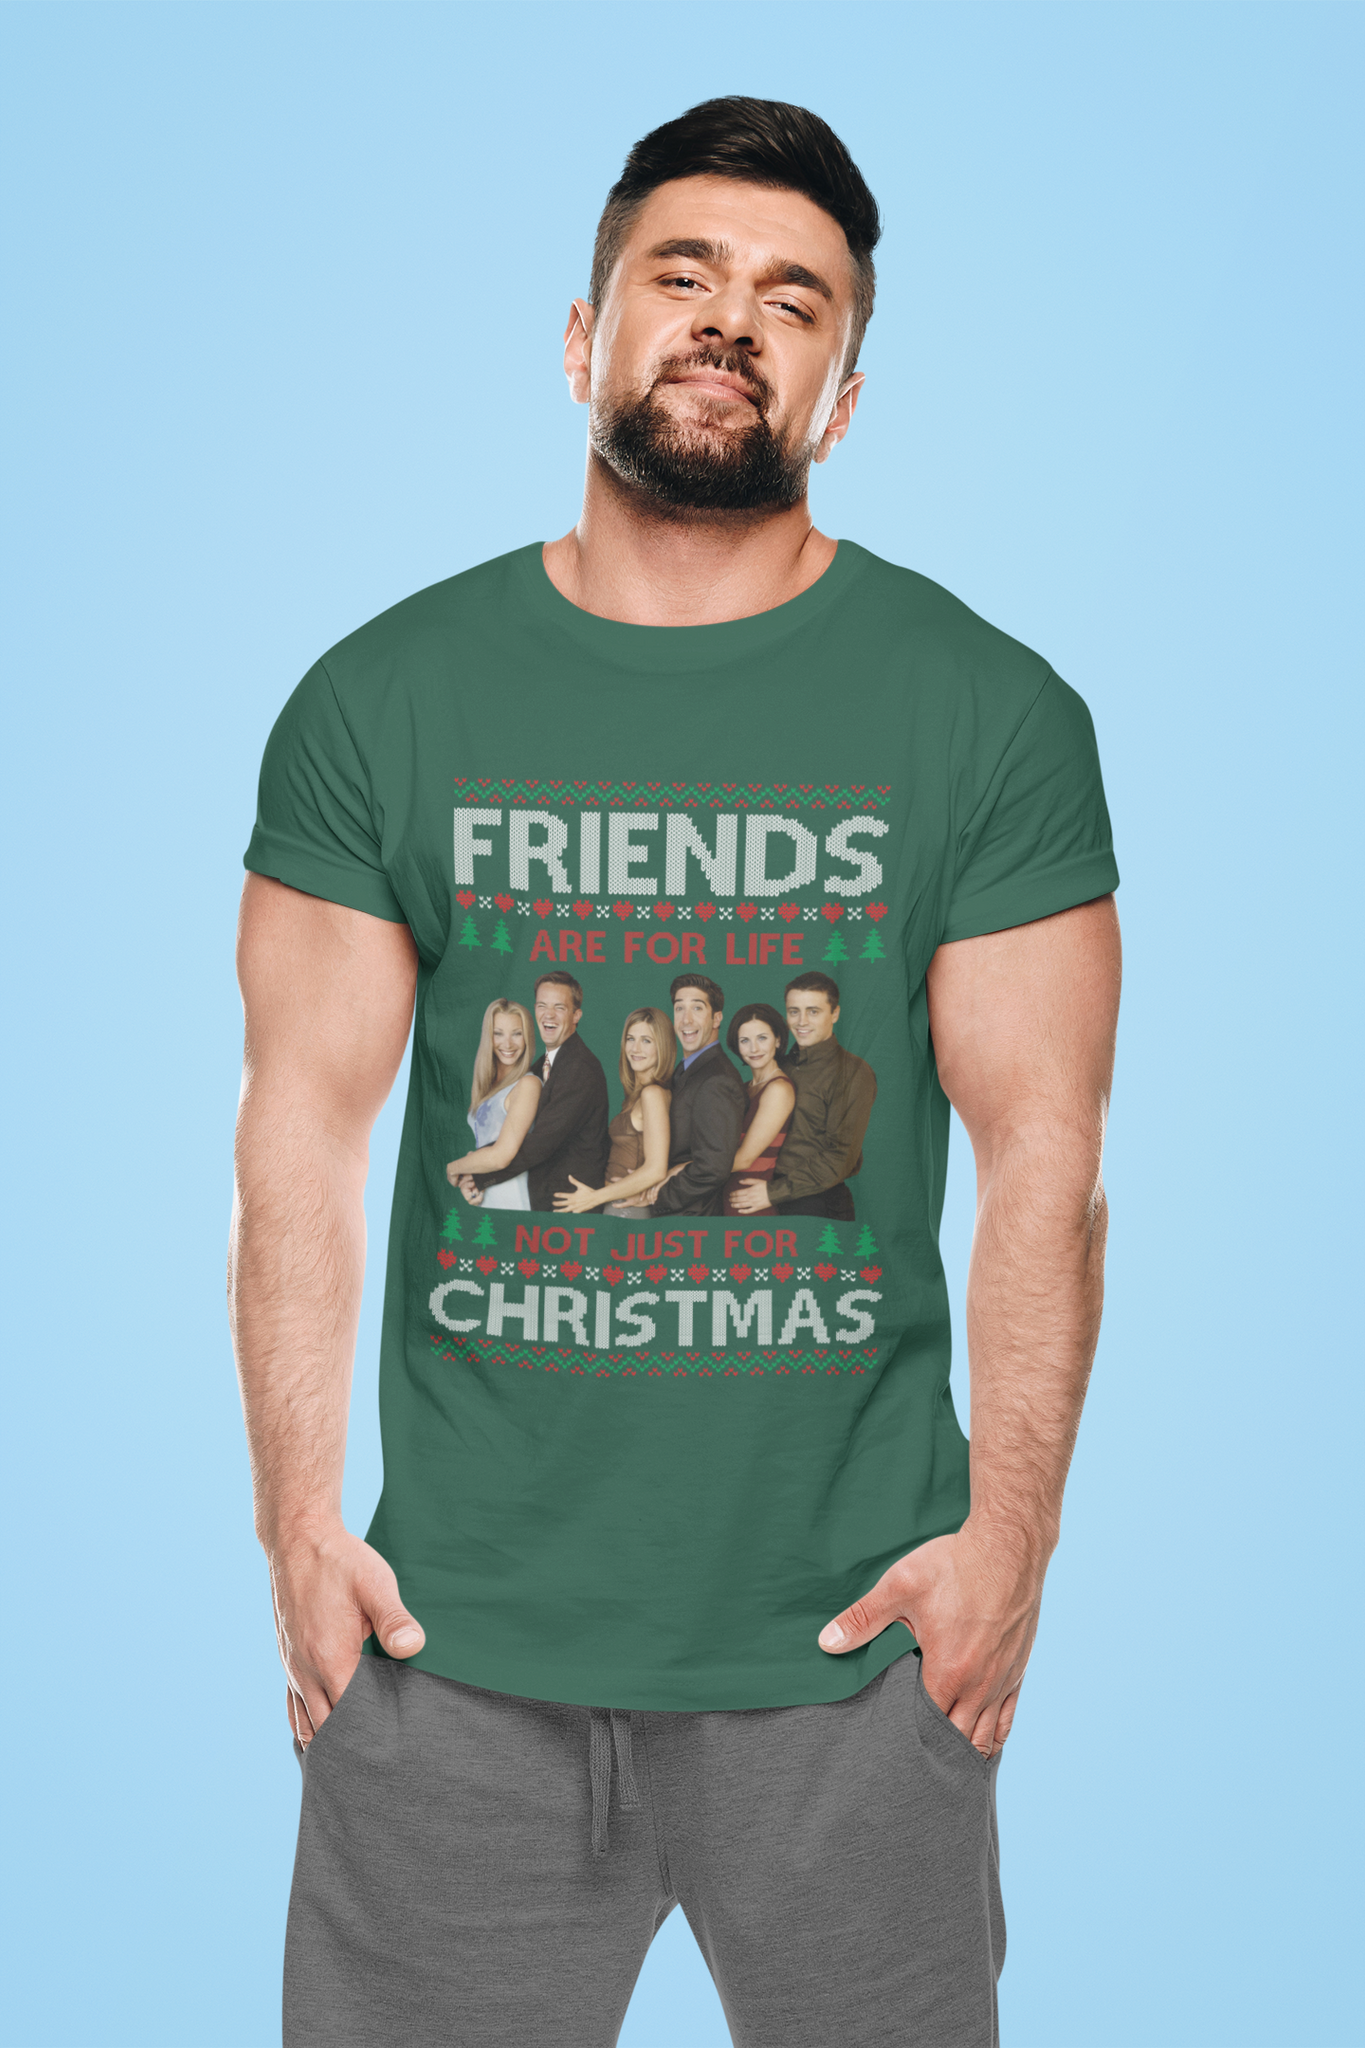 Friends TV Show Ugly Sweater Shirt, Friends Shirt, Friends Characters T Shirt, Friends Are For Life Tshirt, Christmas Gifts